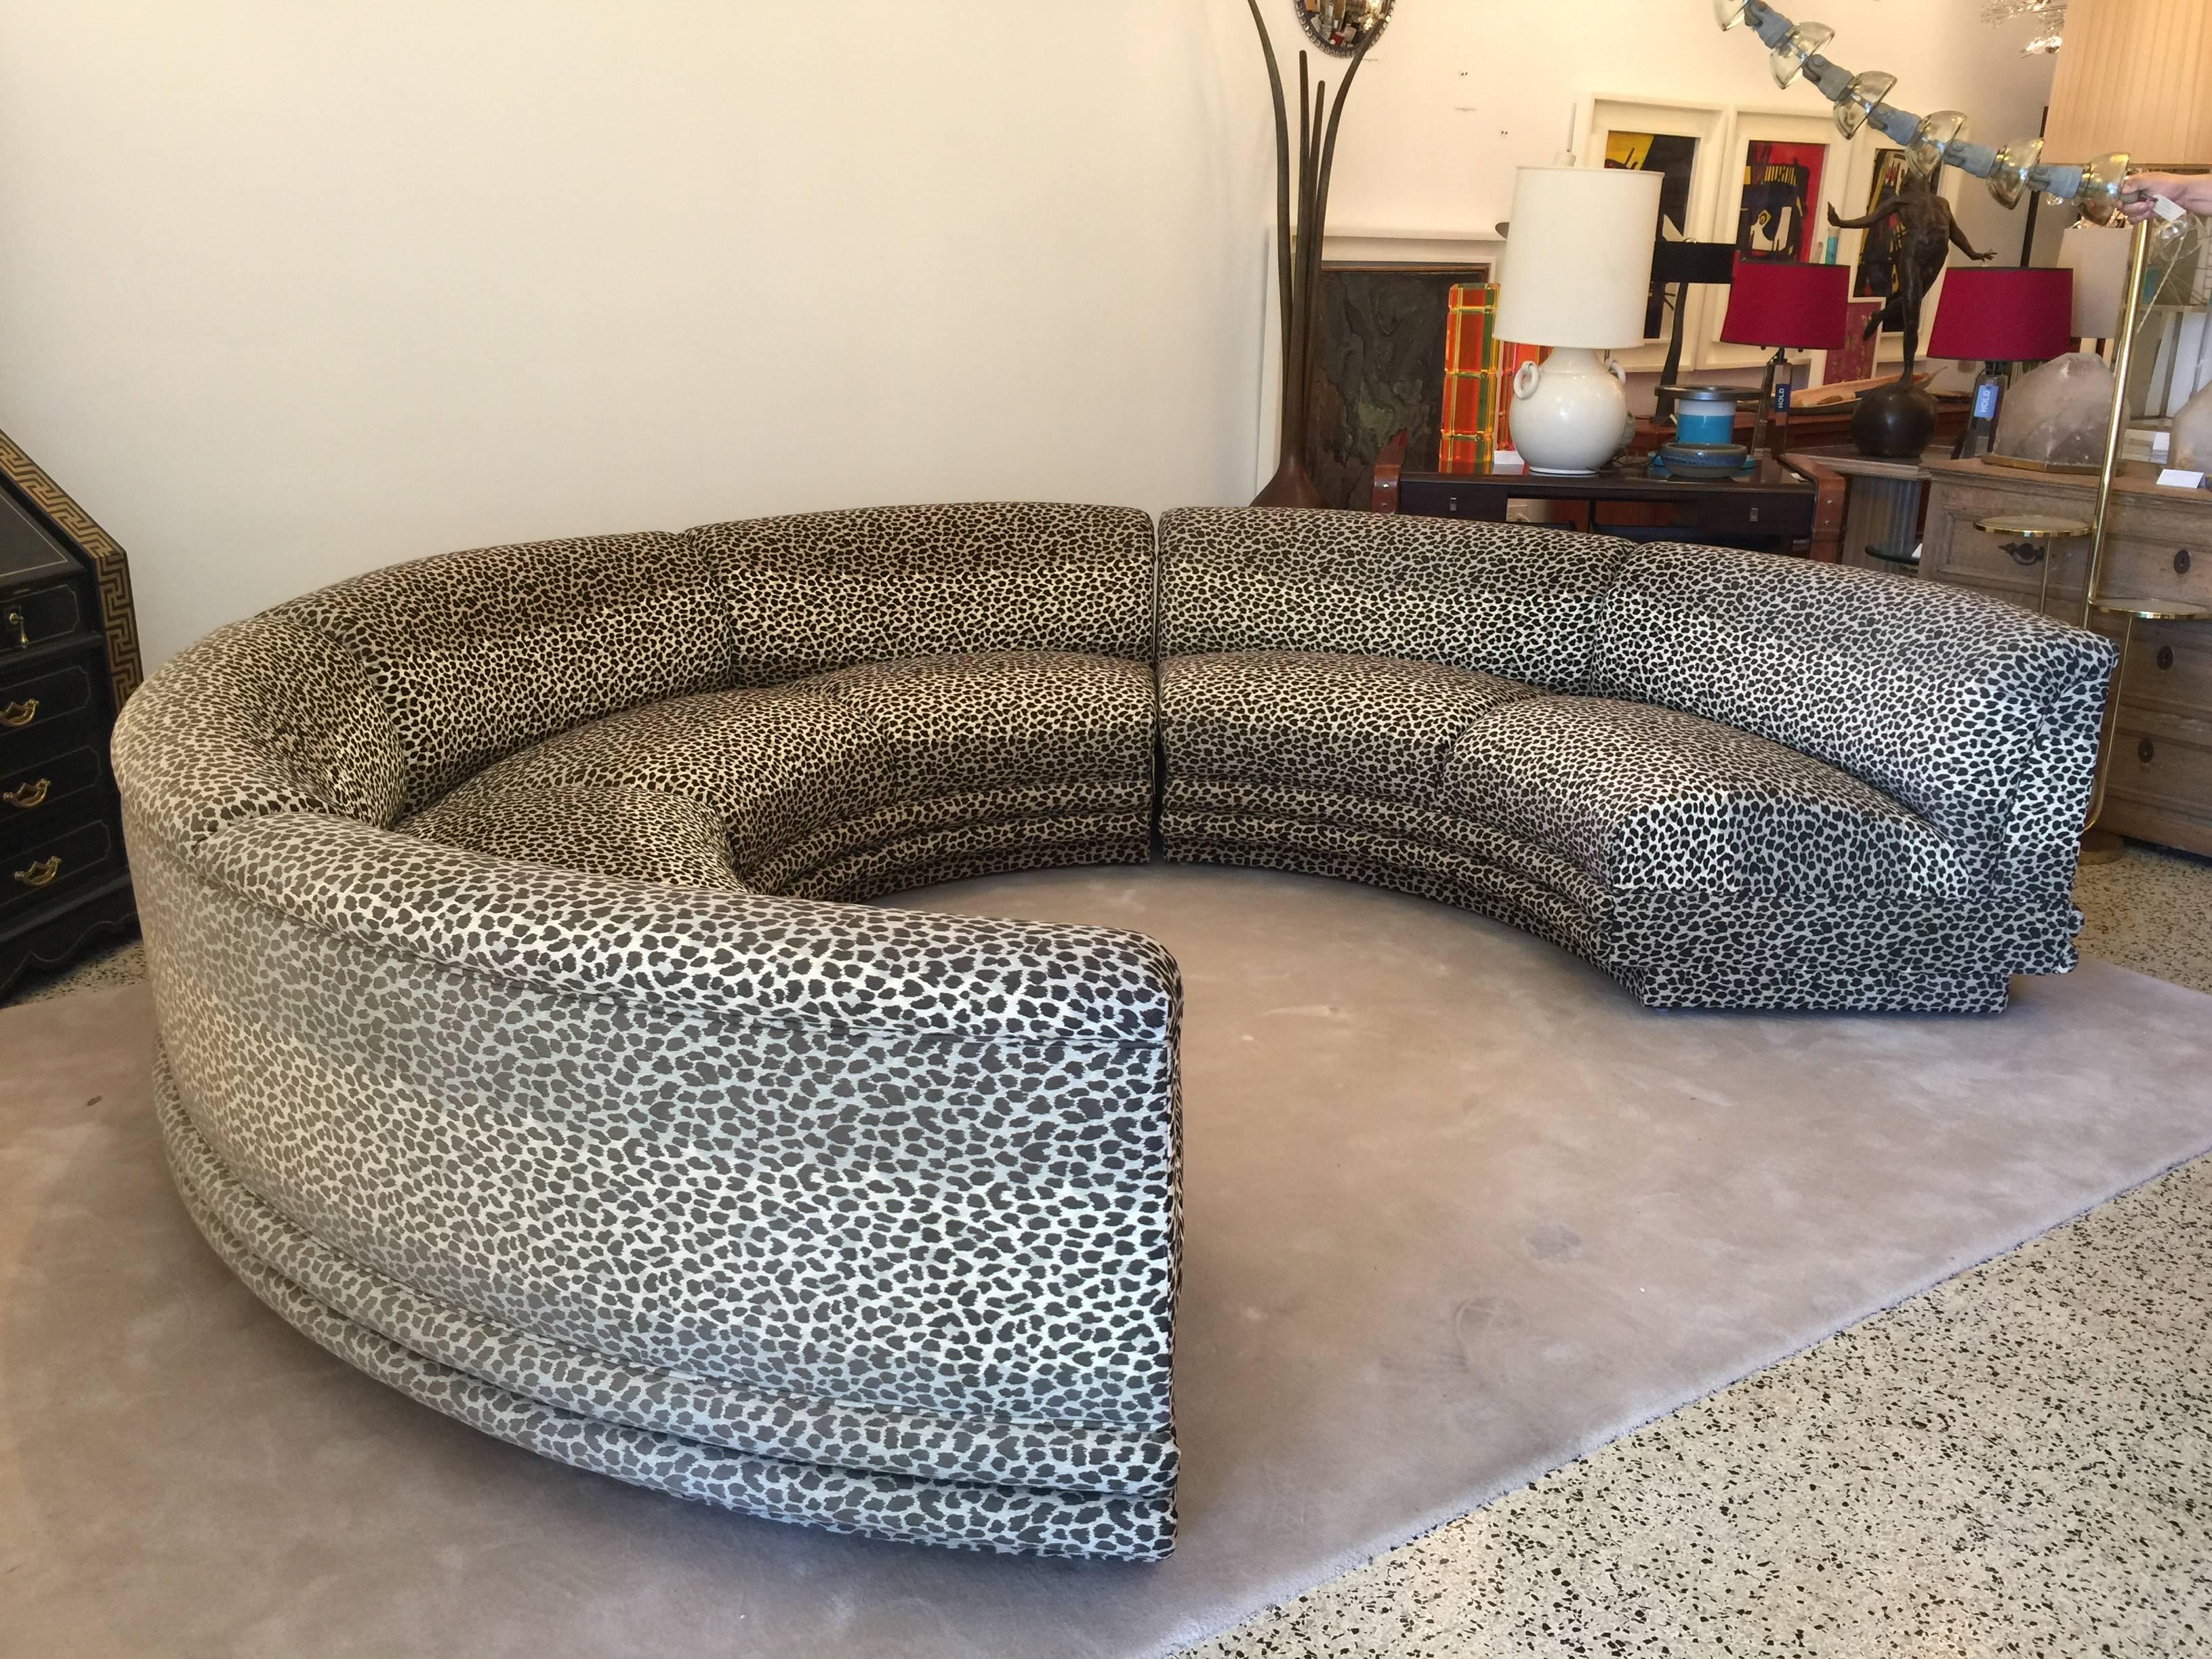 This circular sectional in three pieces is not too big or too small, so easy to place in an open space. It is super comfortable and in great vintage condition. This three section Bernhardt sofa (labelled - often attributed to Milo Baughman) in